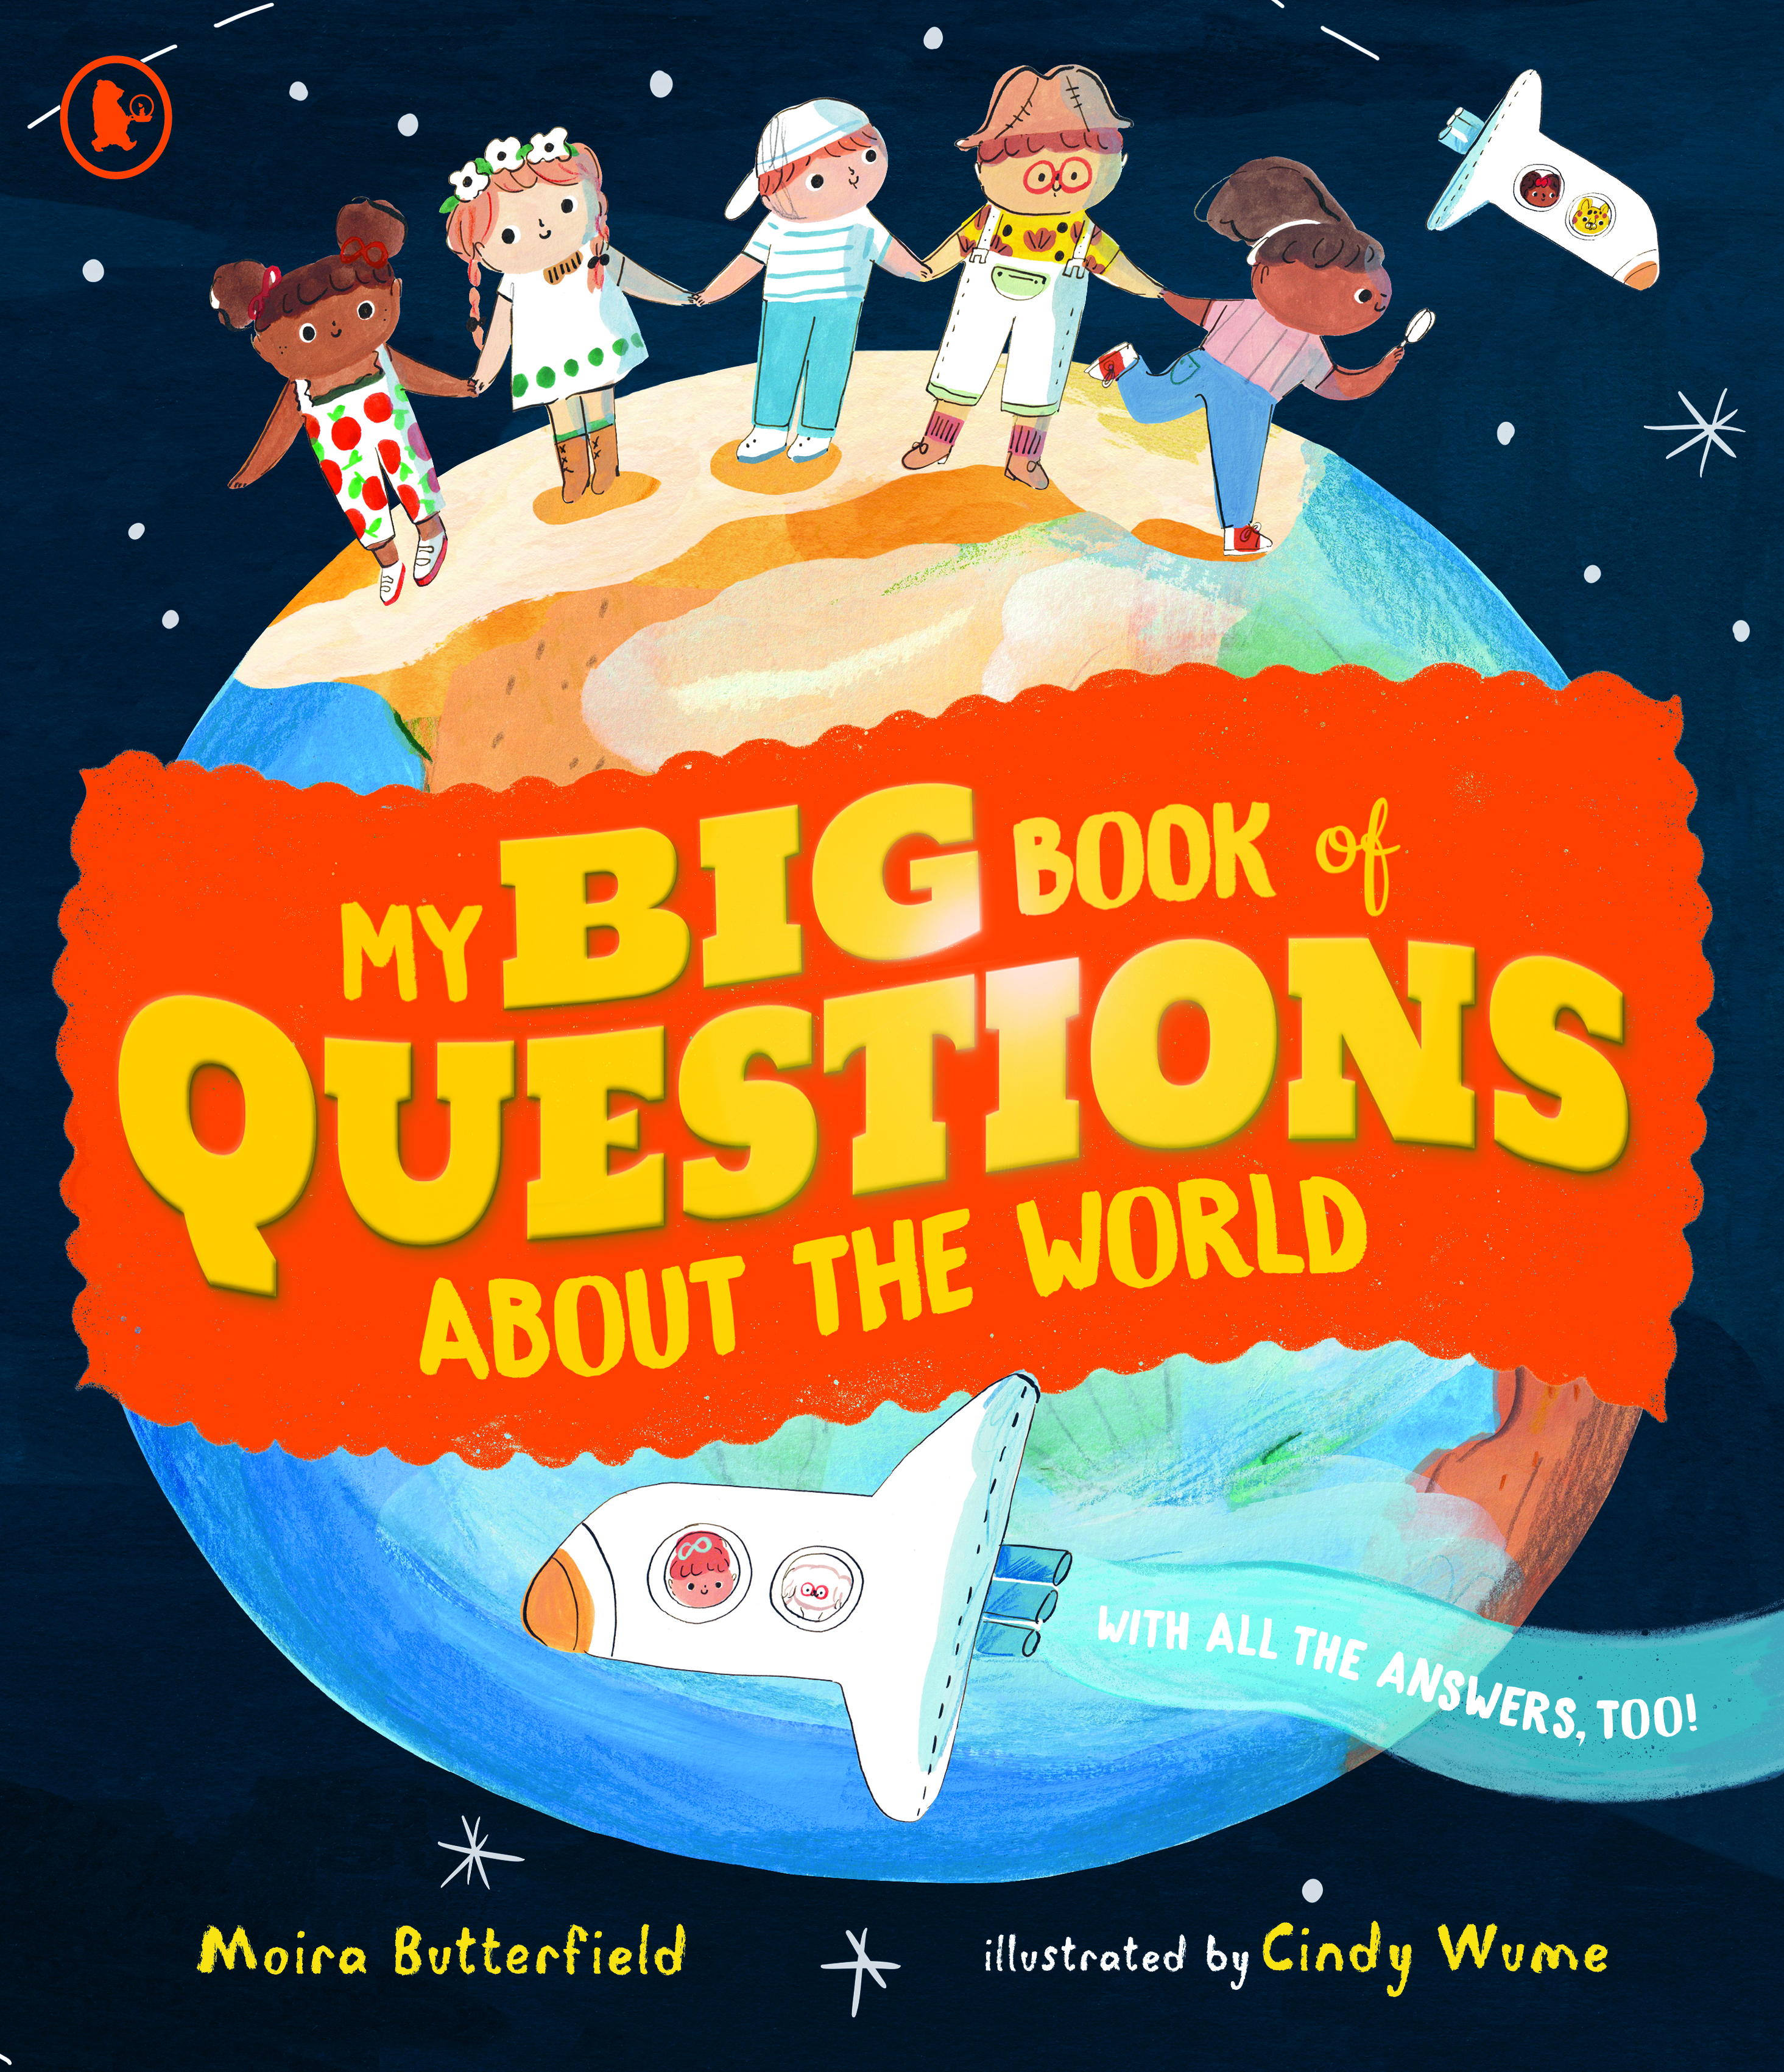 My-Big-Book-of-Questions-About-the-World-with-all-the-Answers-too